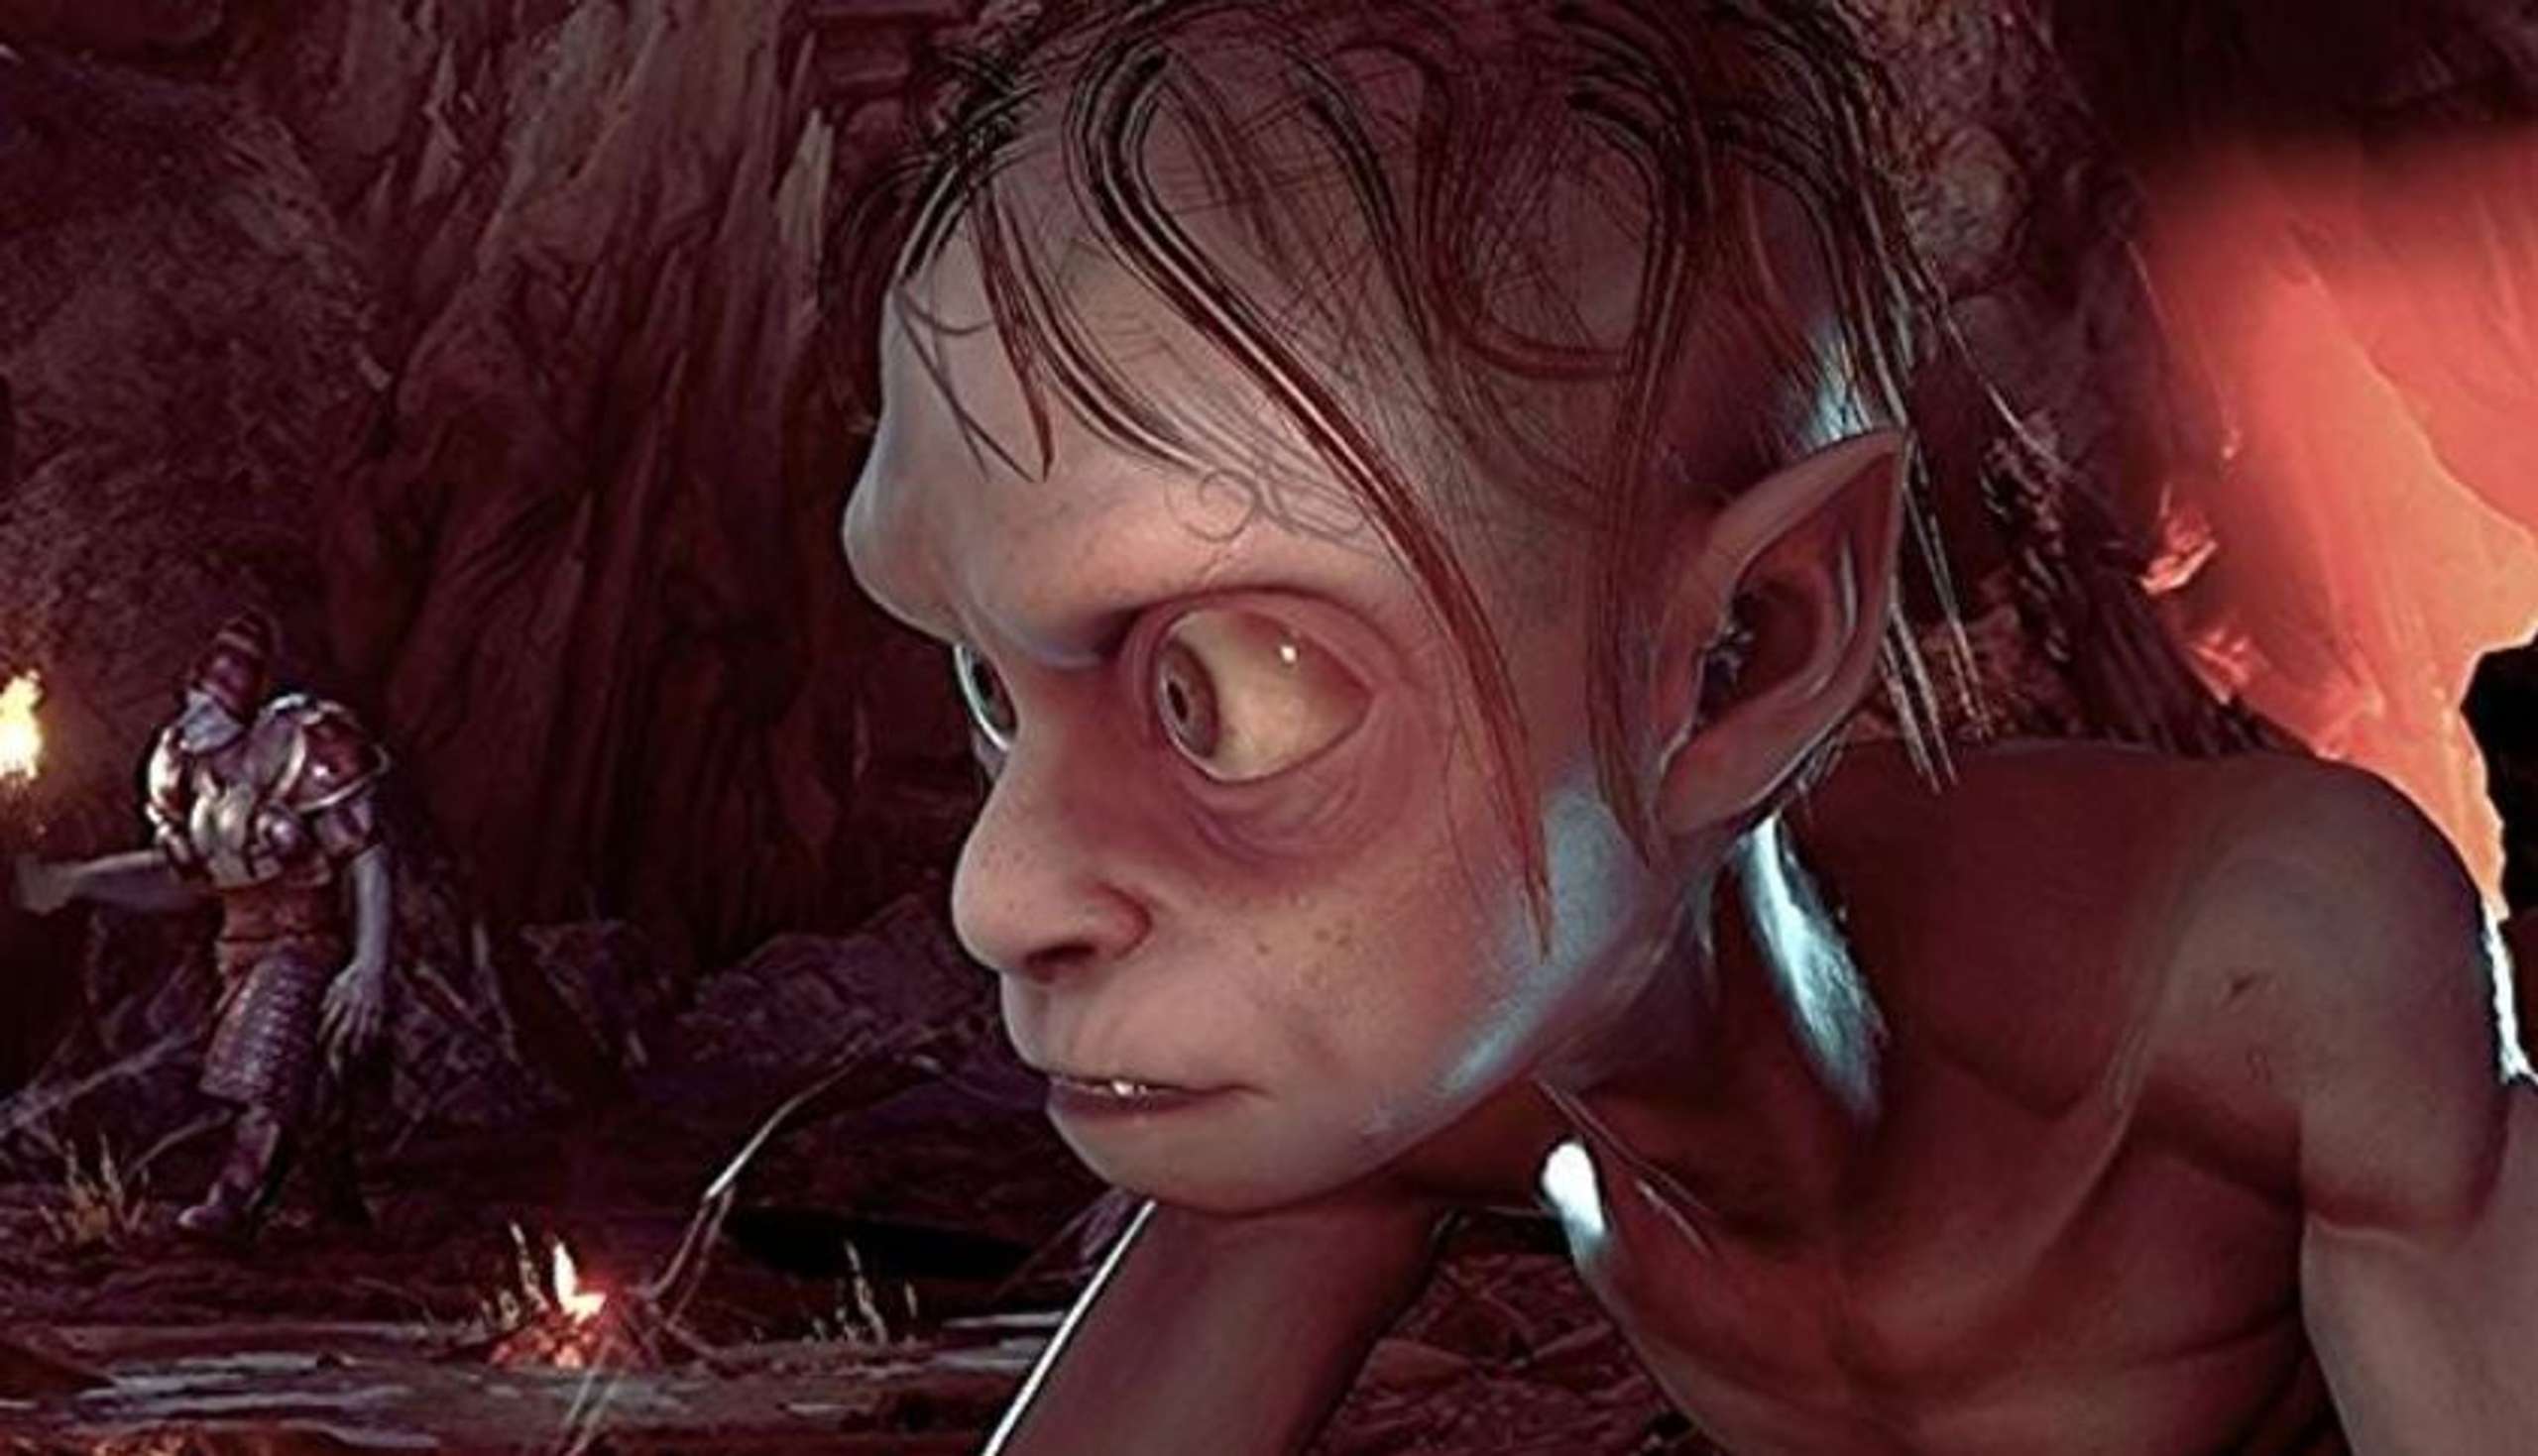 Character Gollum Has Been Delayed On Almost All Platforms From Game The Lord of the Rings: Gollum